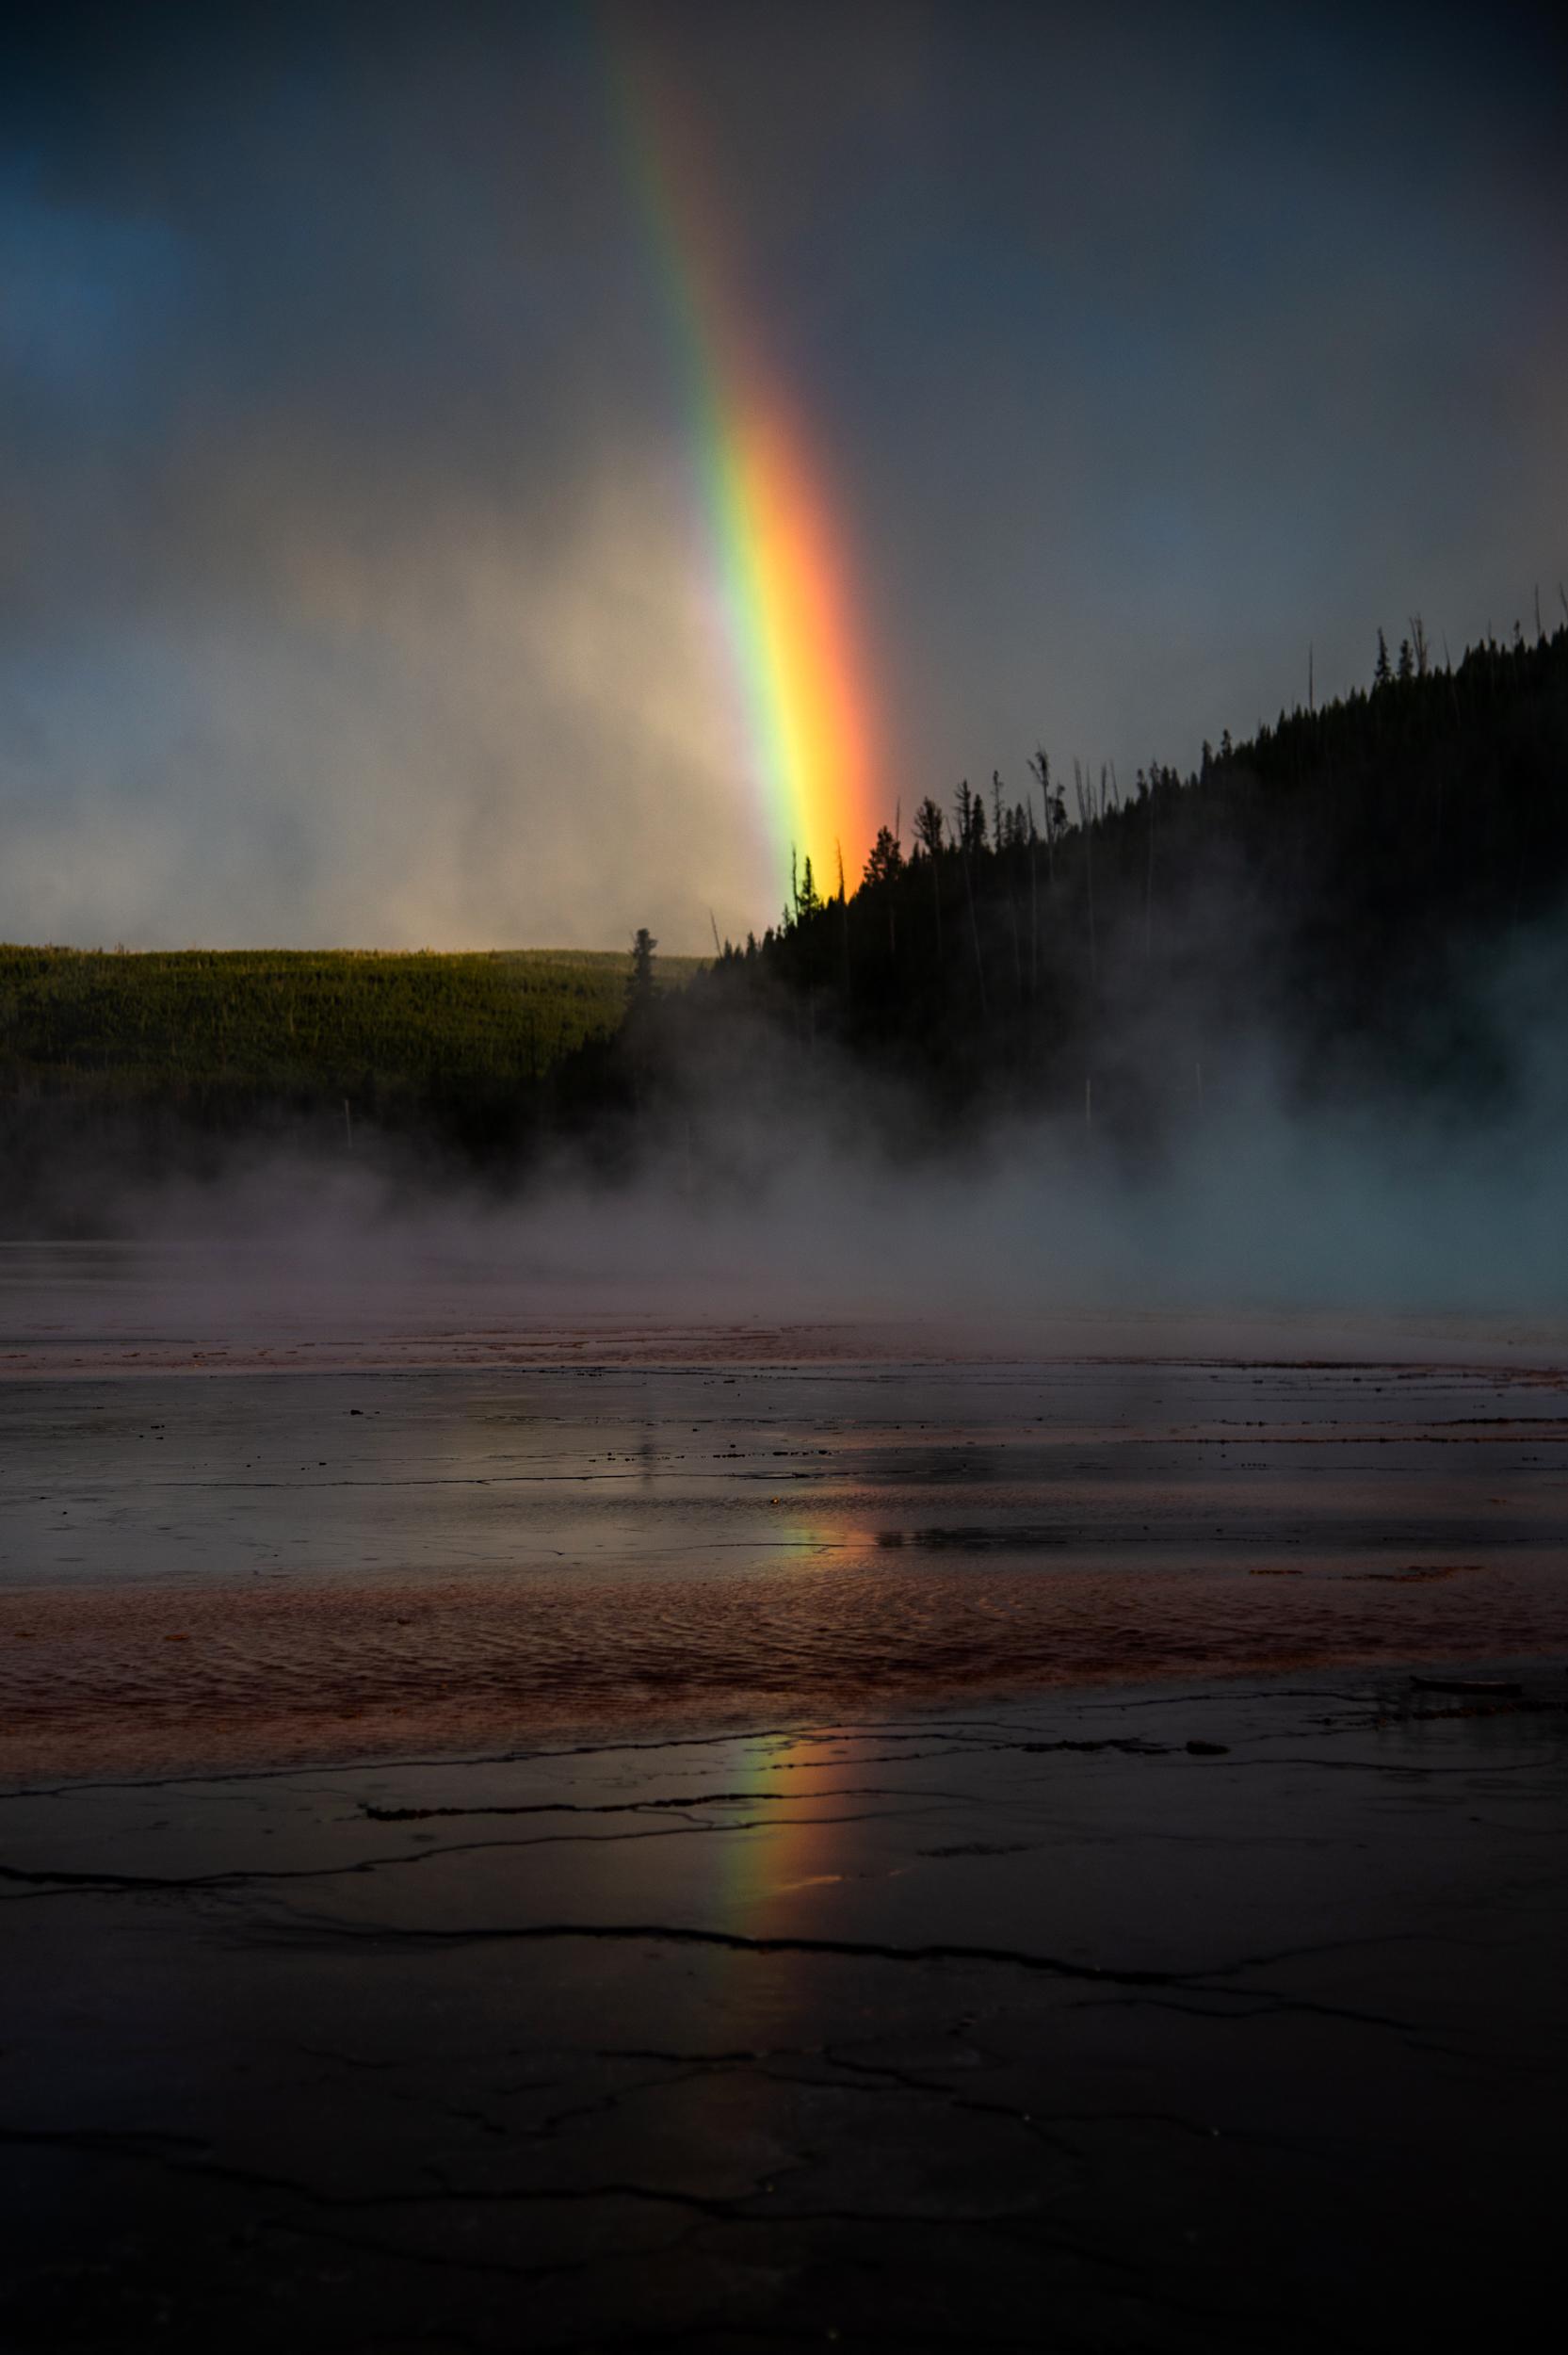 I'd planned to shoot the sunset in Yellowstone National Park but a